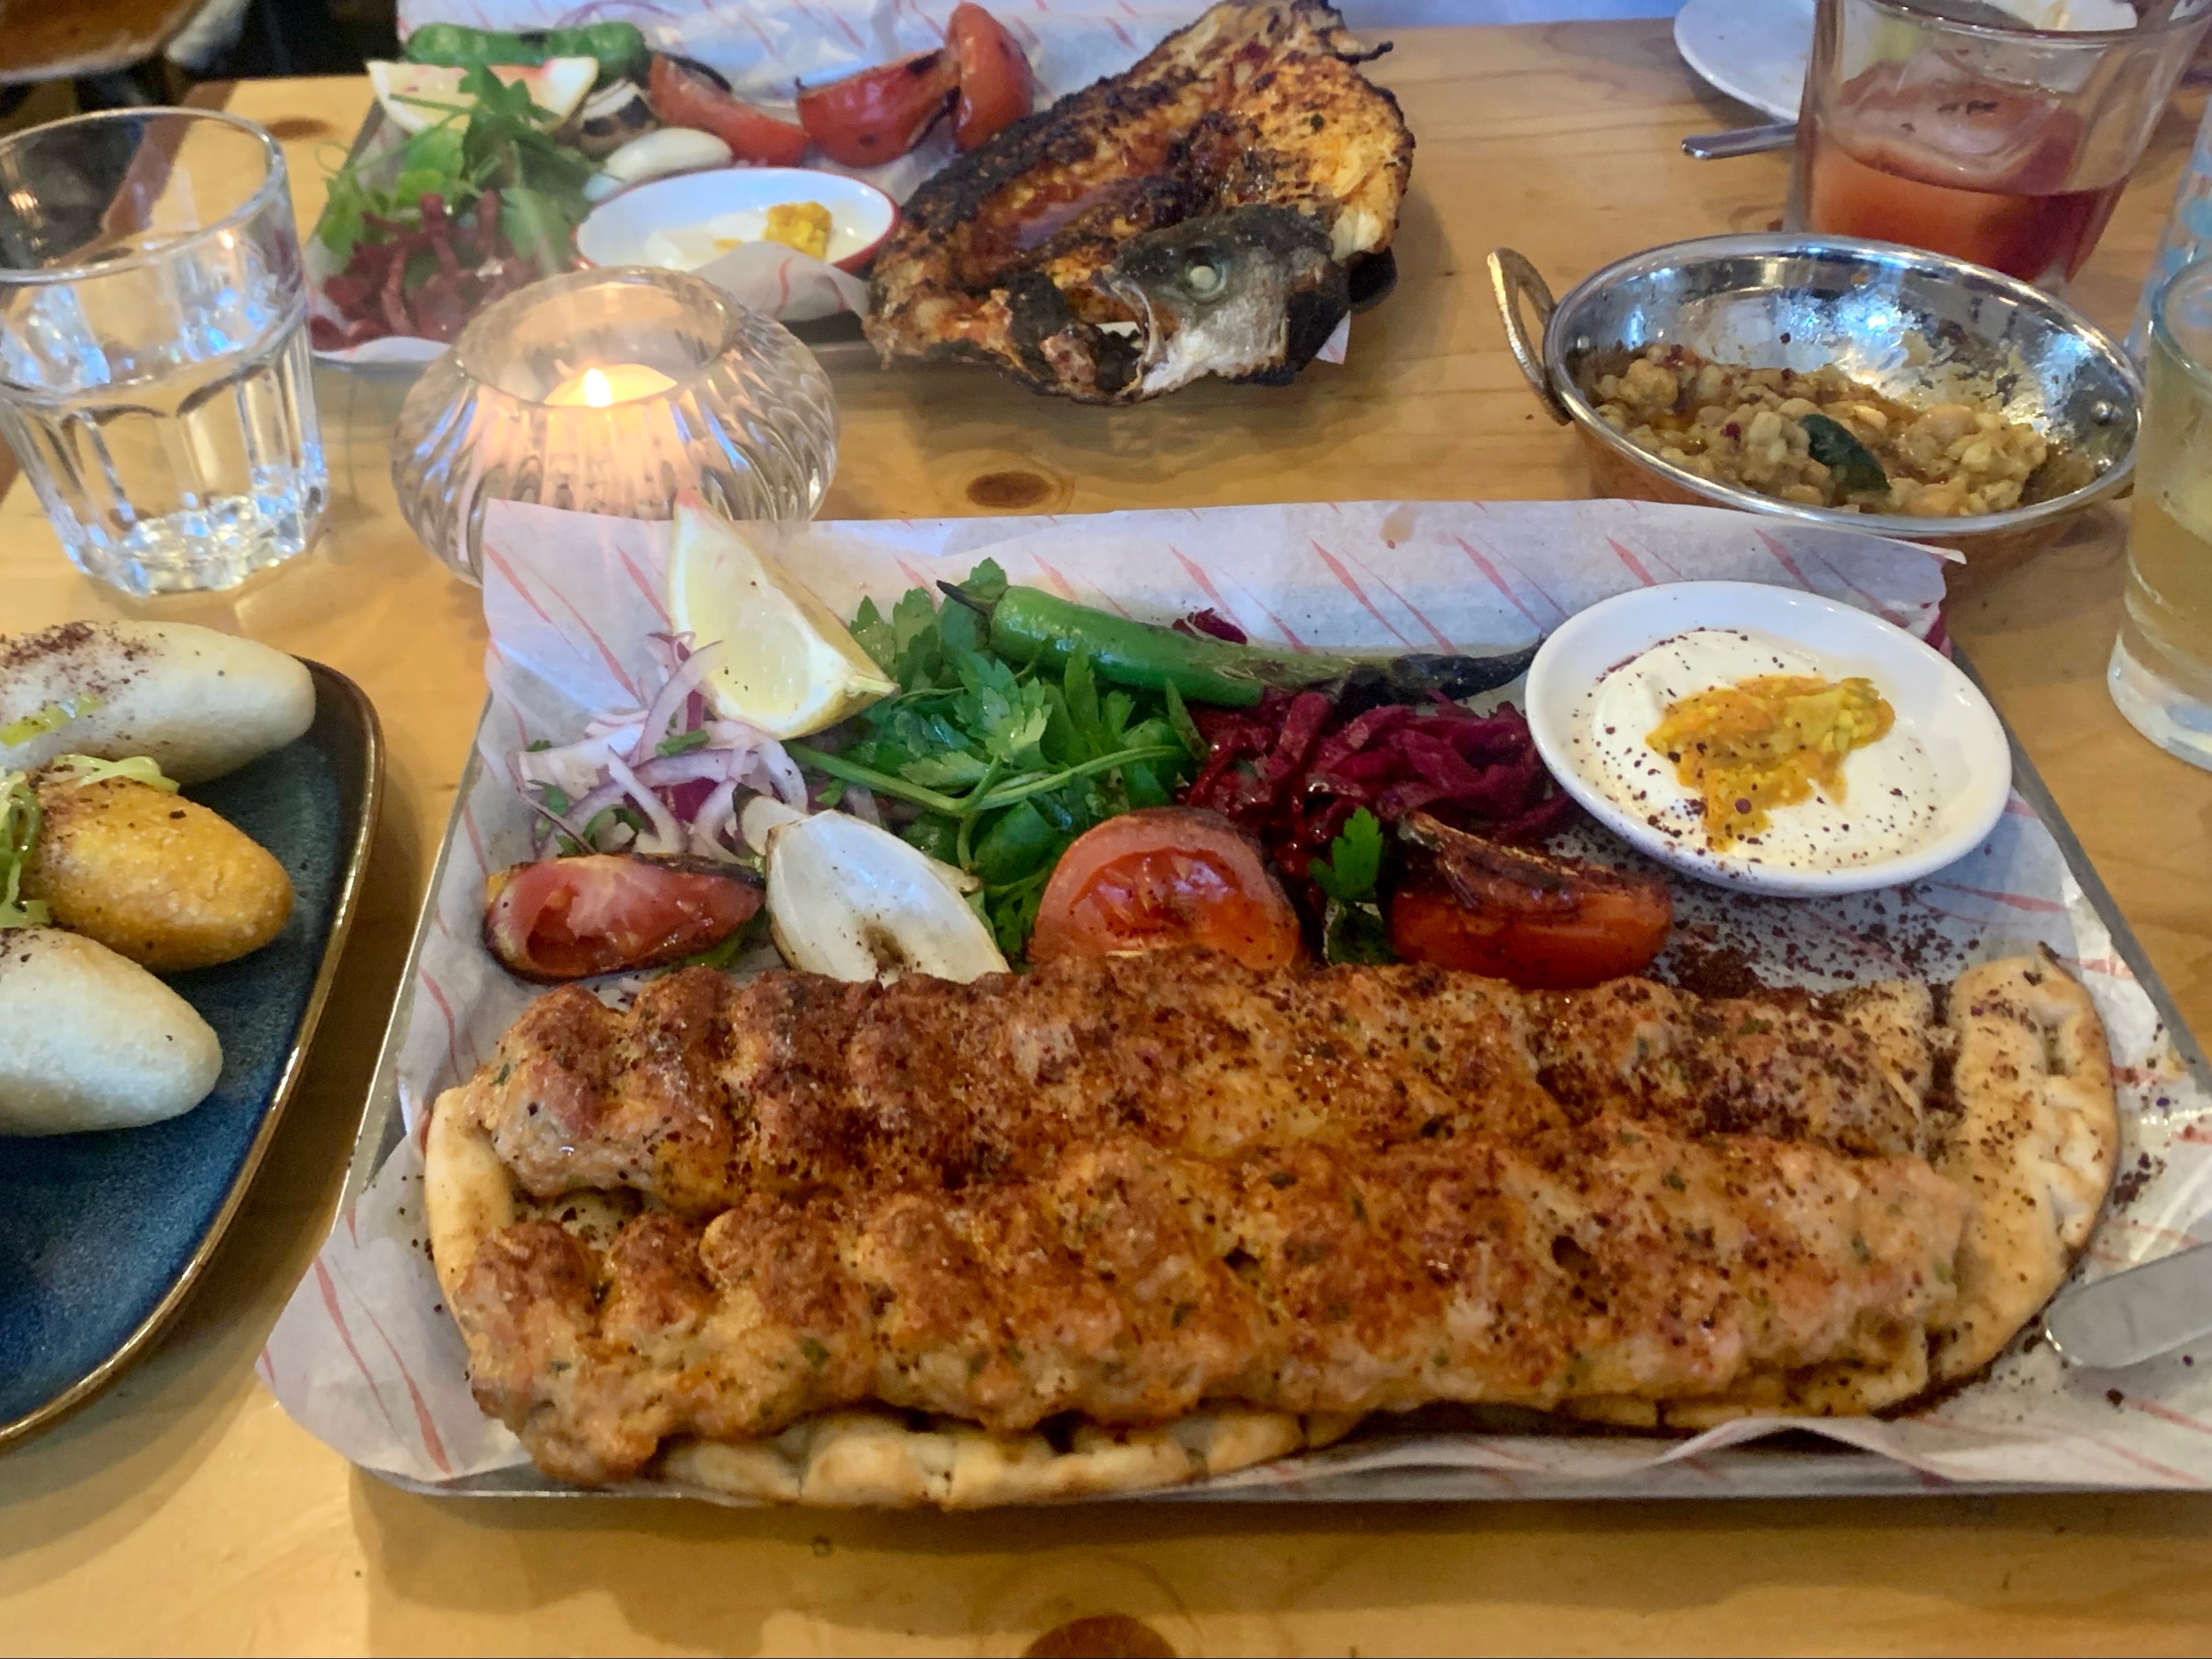 The large, flavourful plates at Nandine introduce diners to Kurdish cuisine in sterling fashion